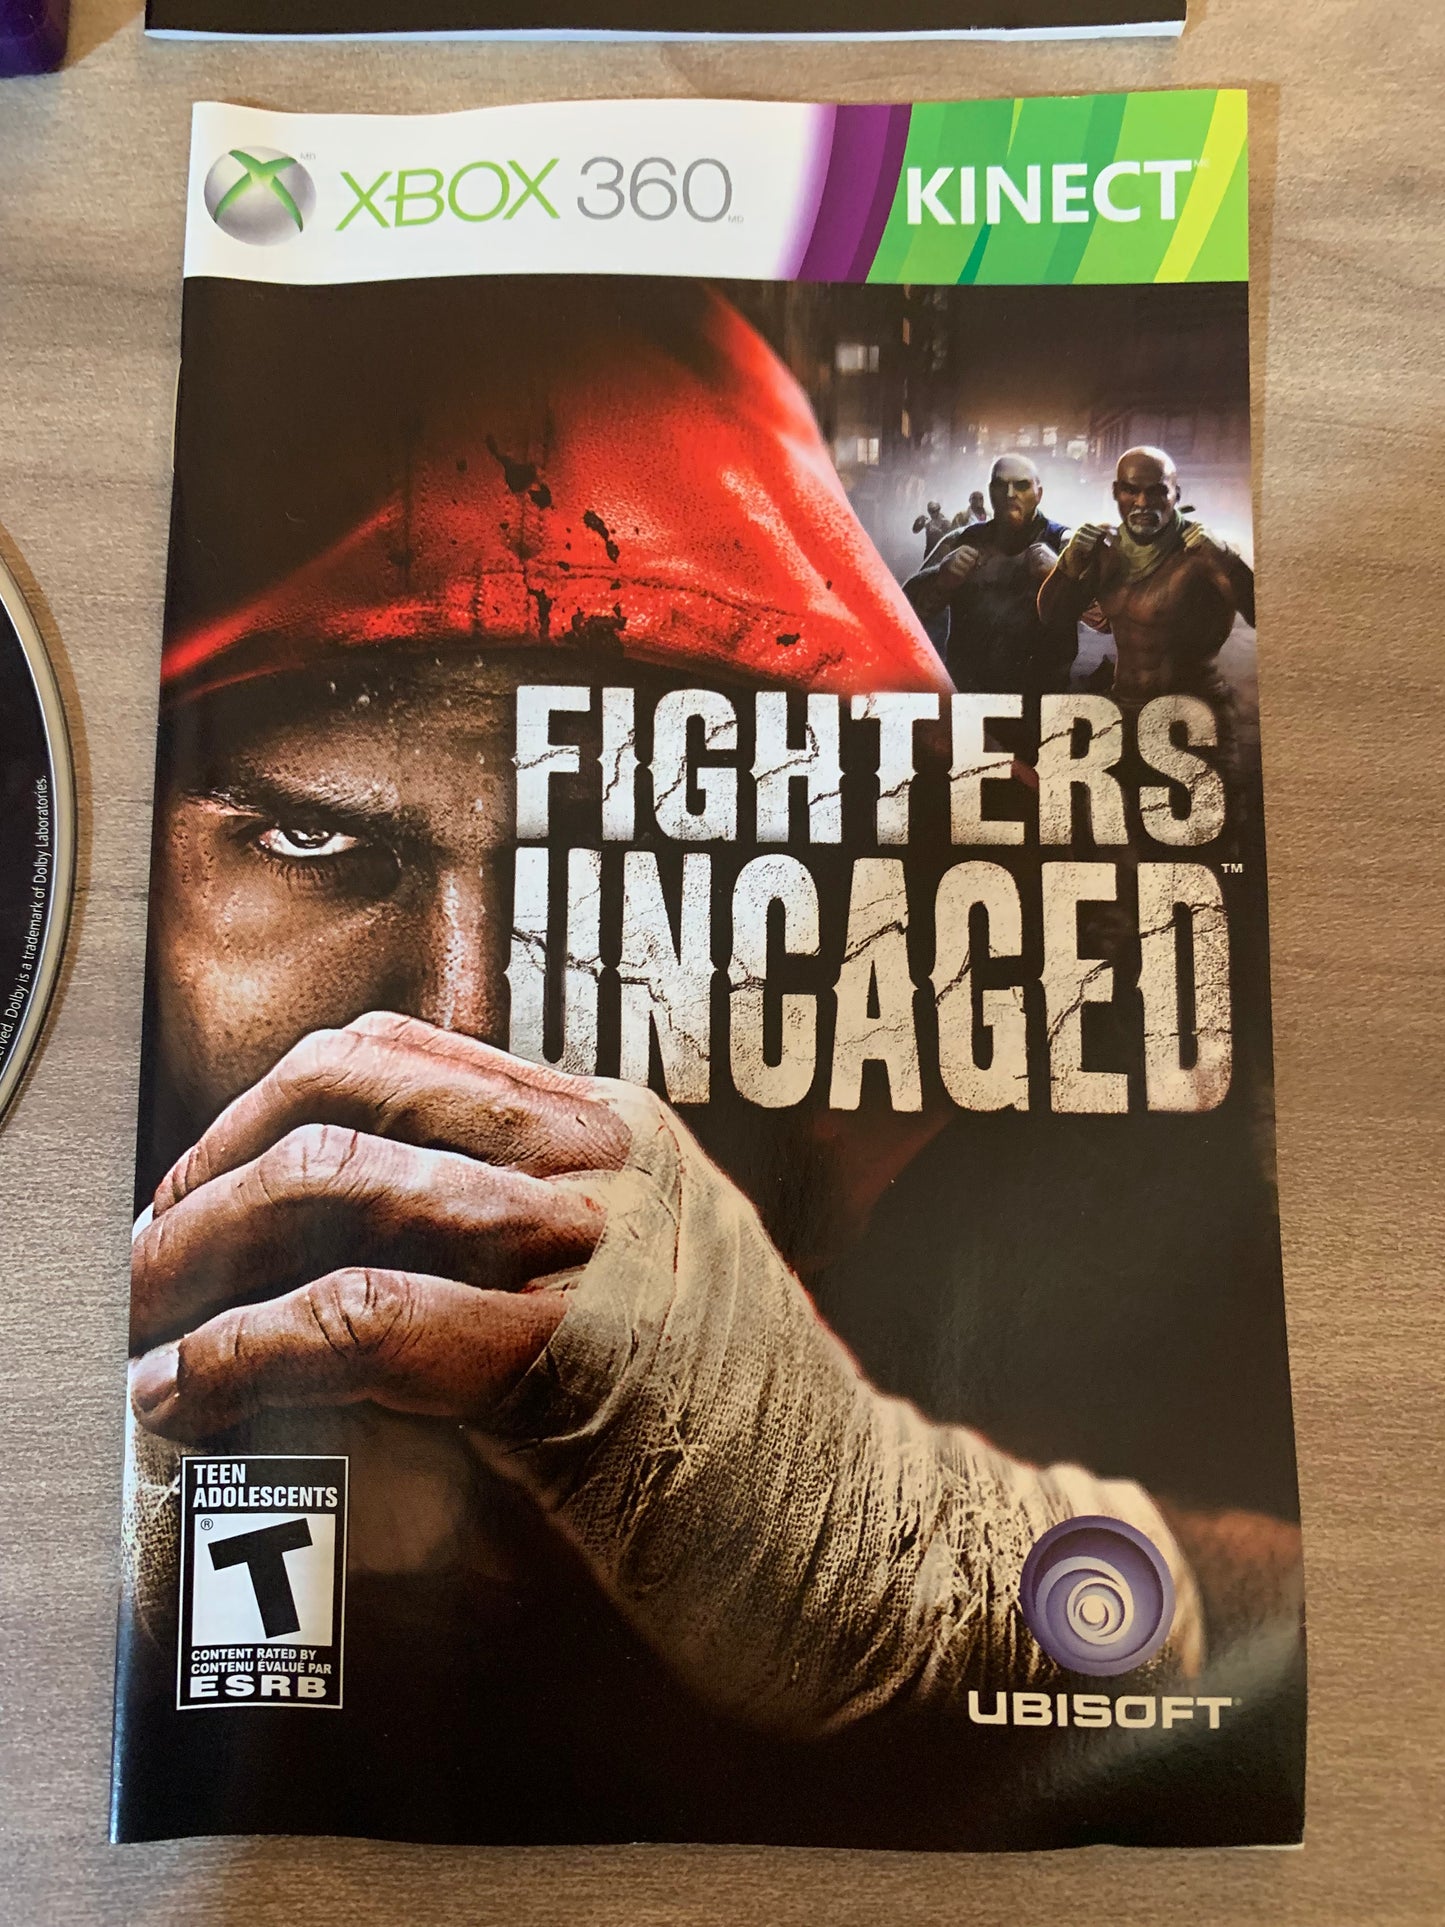 MiCROSOFT XBOX 360 | FiGHTERS UNCAGED